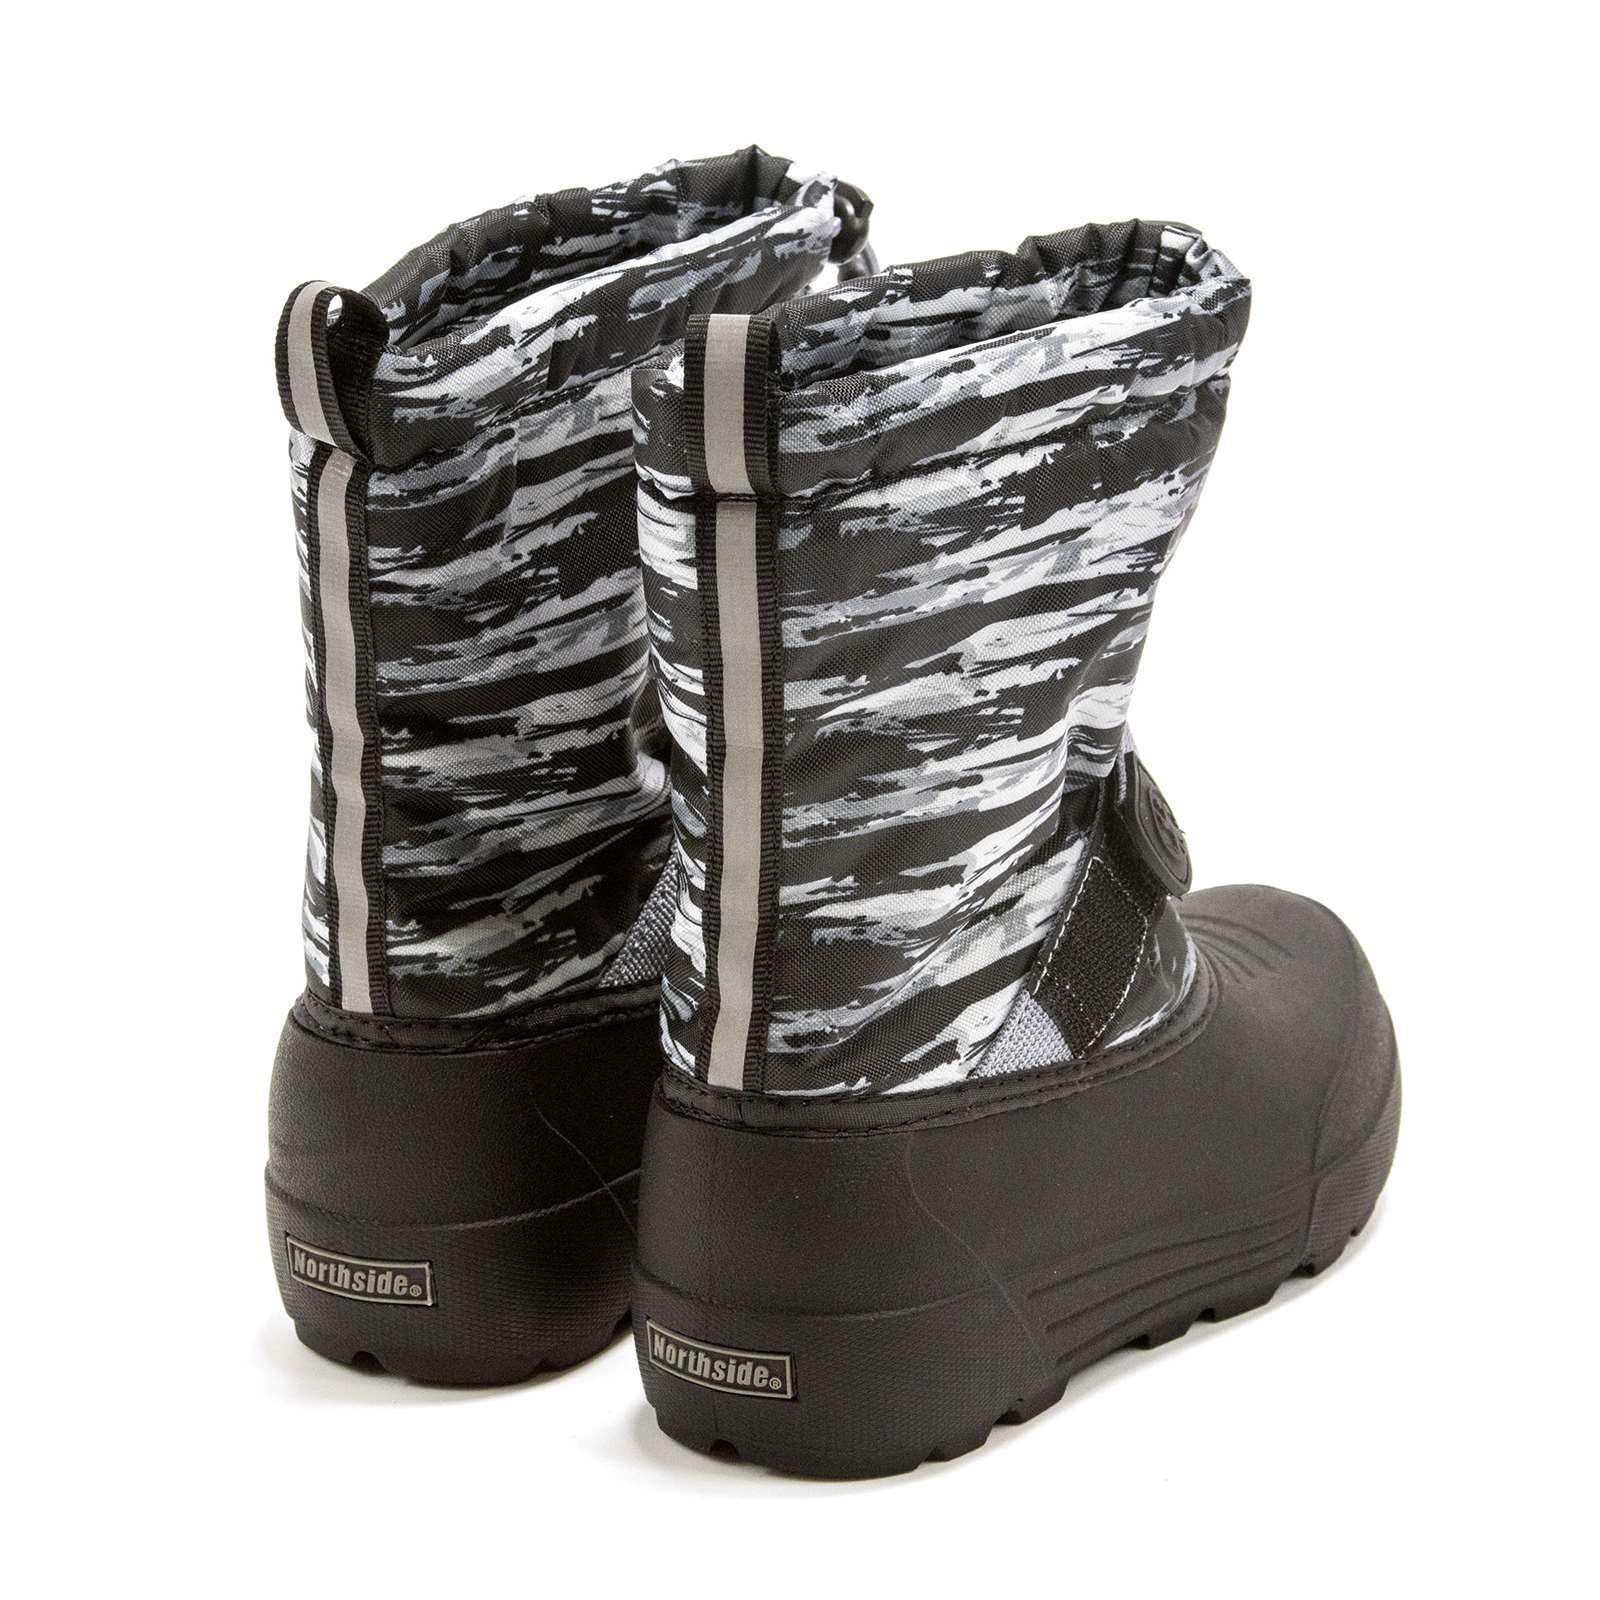 Northside Toddlers Frosty Insulated Snow Boot, Charcoal Black,5 M US